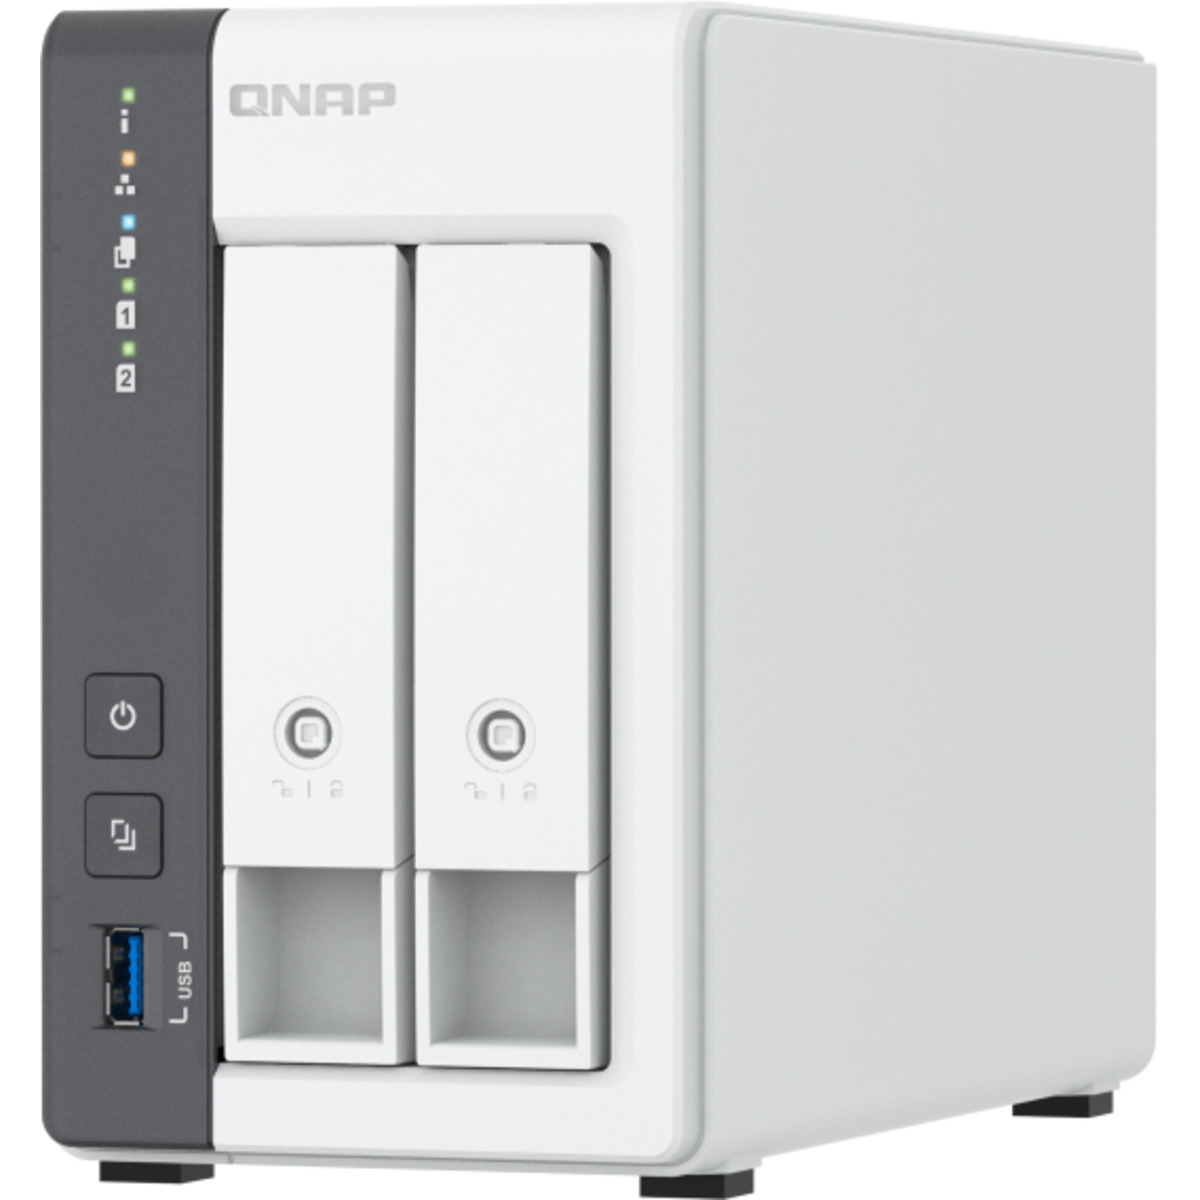 QNAP TS-216G 28tb 2-Bay Desktop Personal / Basic Home / Small Office NAS - Network Attached Storage Device 2x14tb Seagate IronWolf Pro ST14000NT001 3.5 7200rpm SATA 6Gb/s HDD NAS Class Drives Installed - Burn-In Tested TS-216G